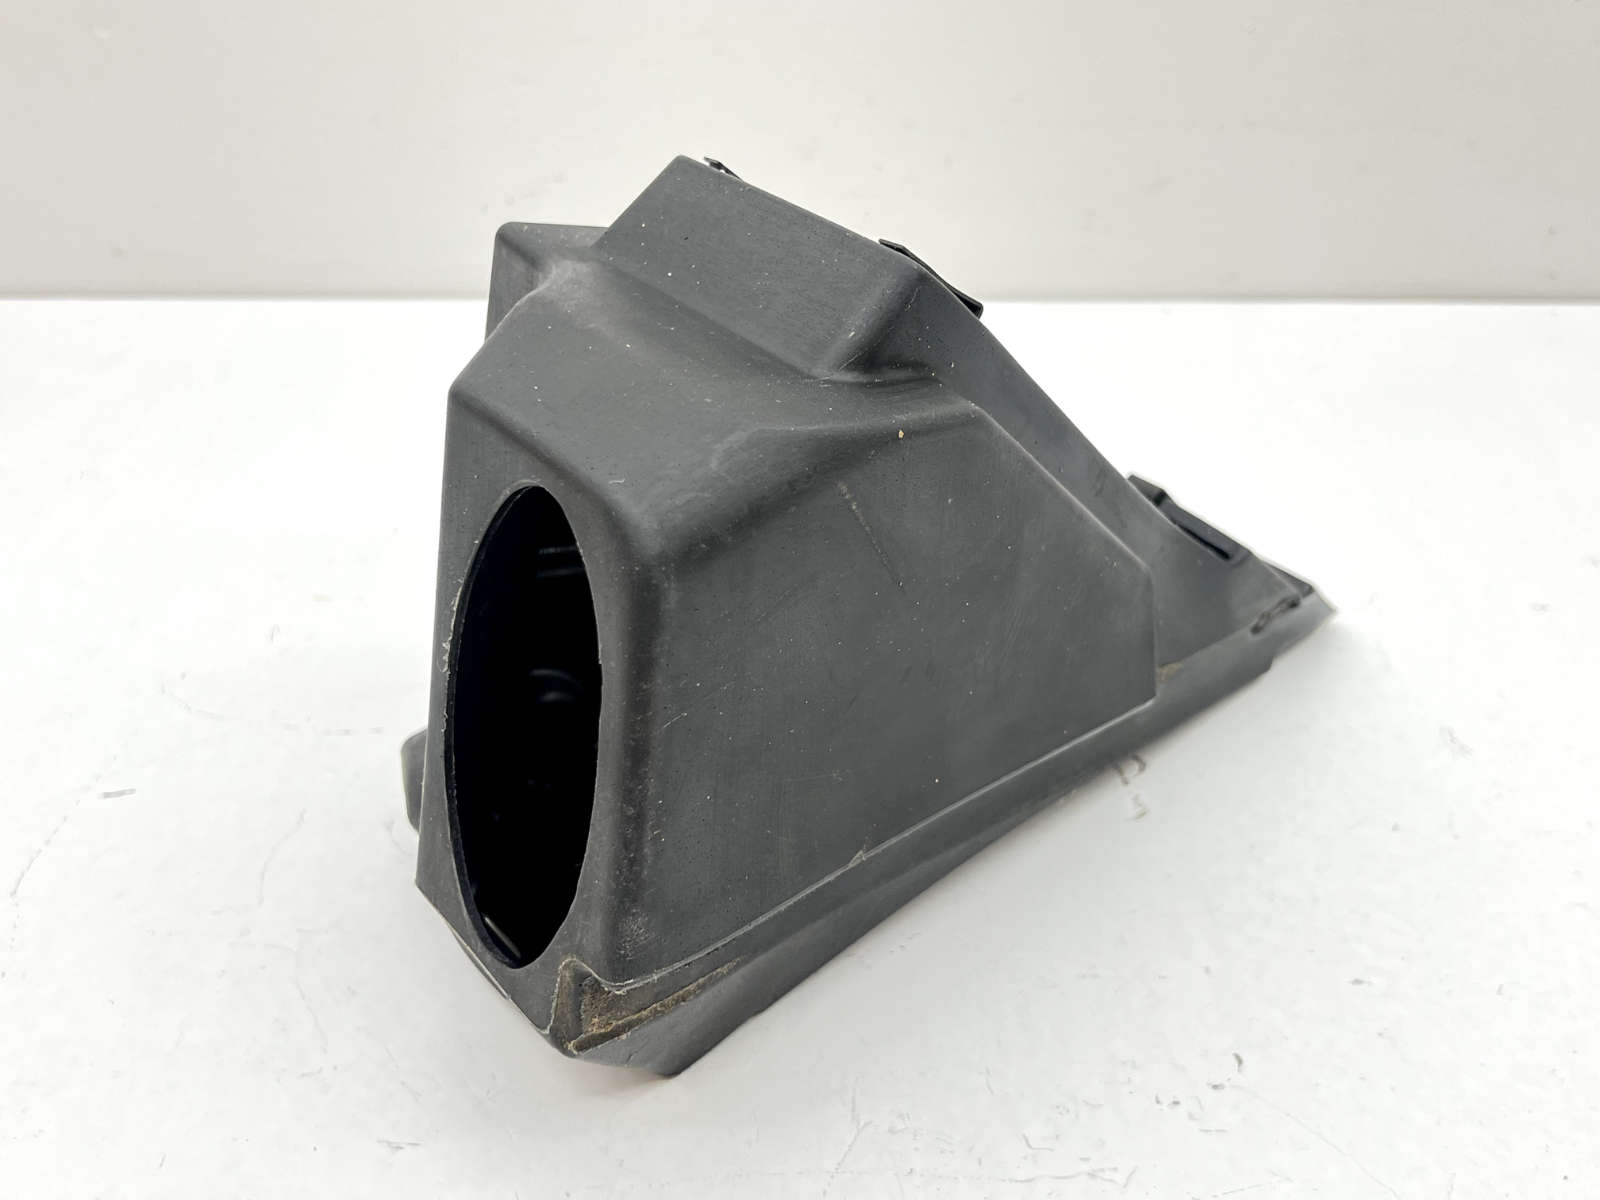 2021 Cobra CX50 FWE Airbox Air Filter Box Boot Cage Intake Stock Duct OEM Part